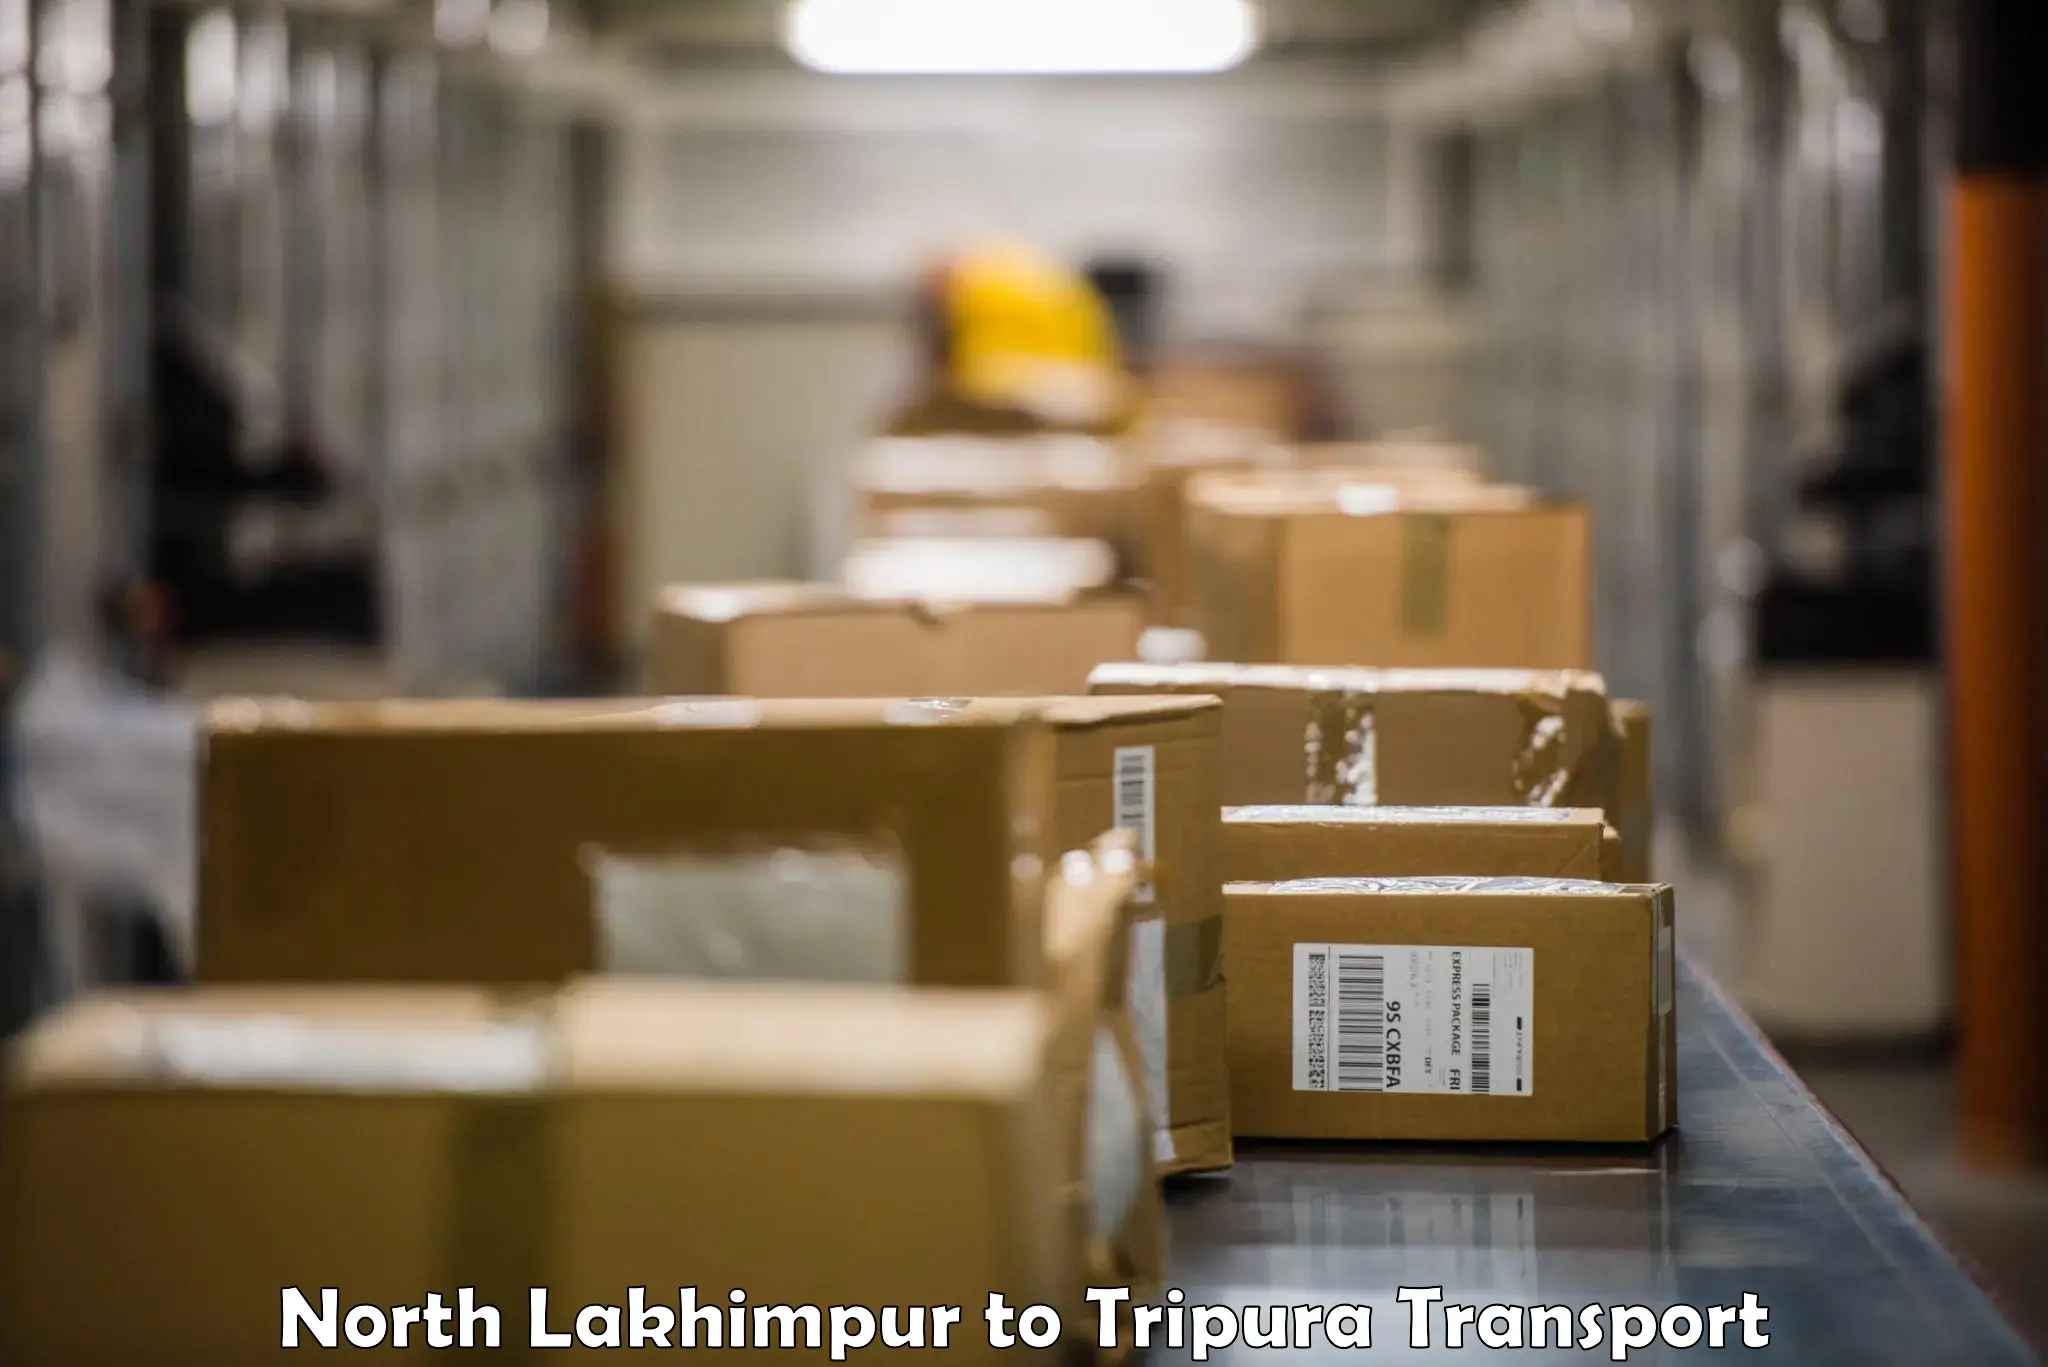 Daily parcel service transport North Lakhimpur to North Tripura